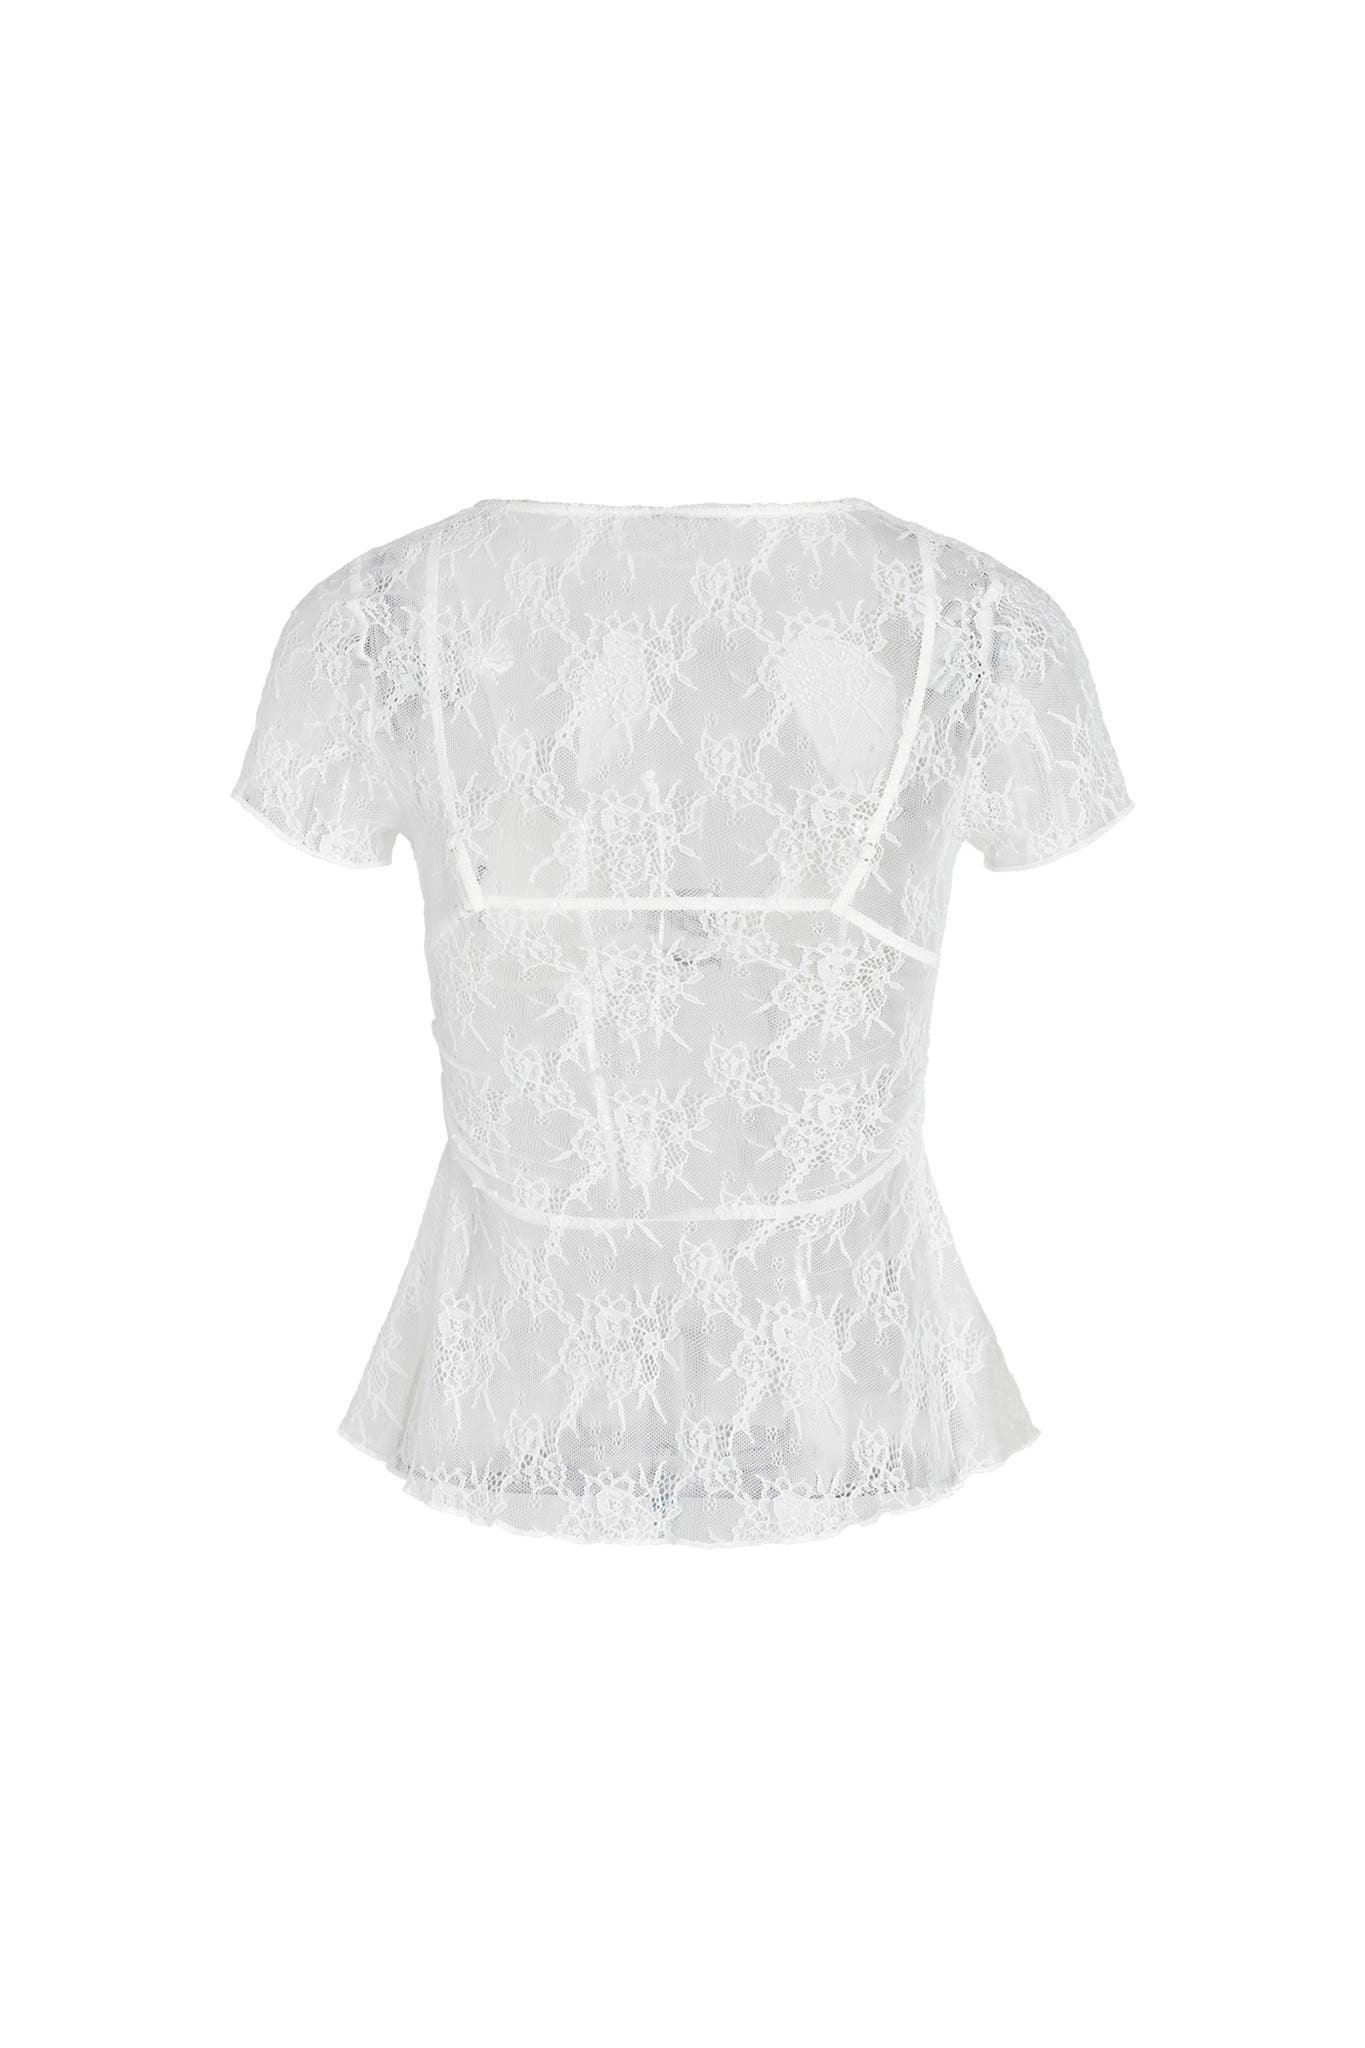 JACQUEY TWO PIECE TOP - WHITE : LACE